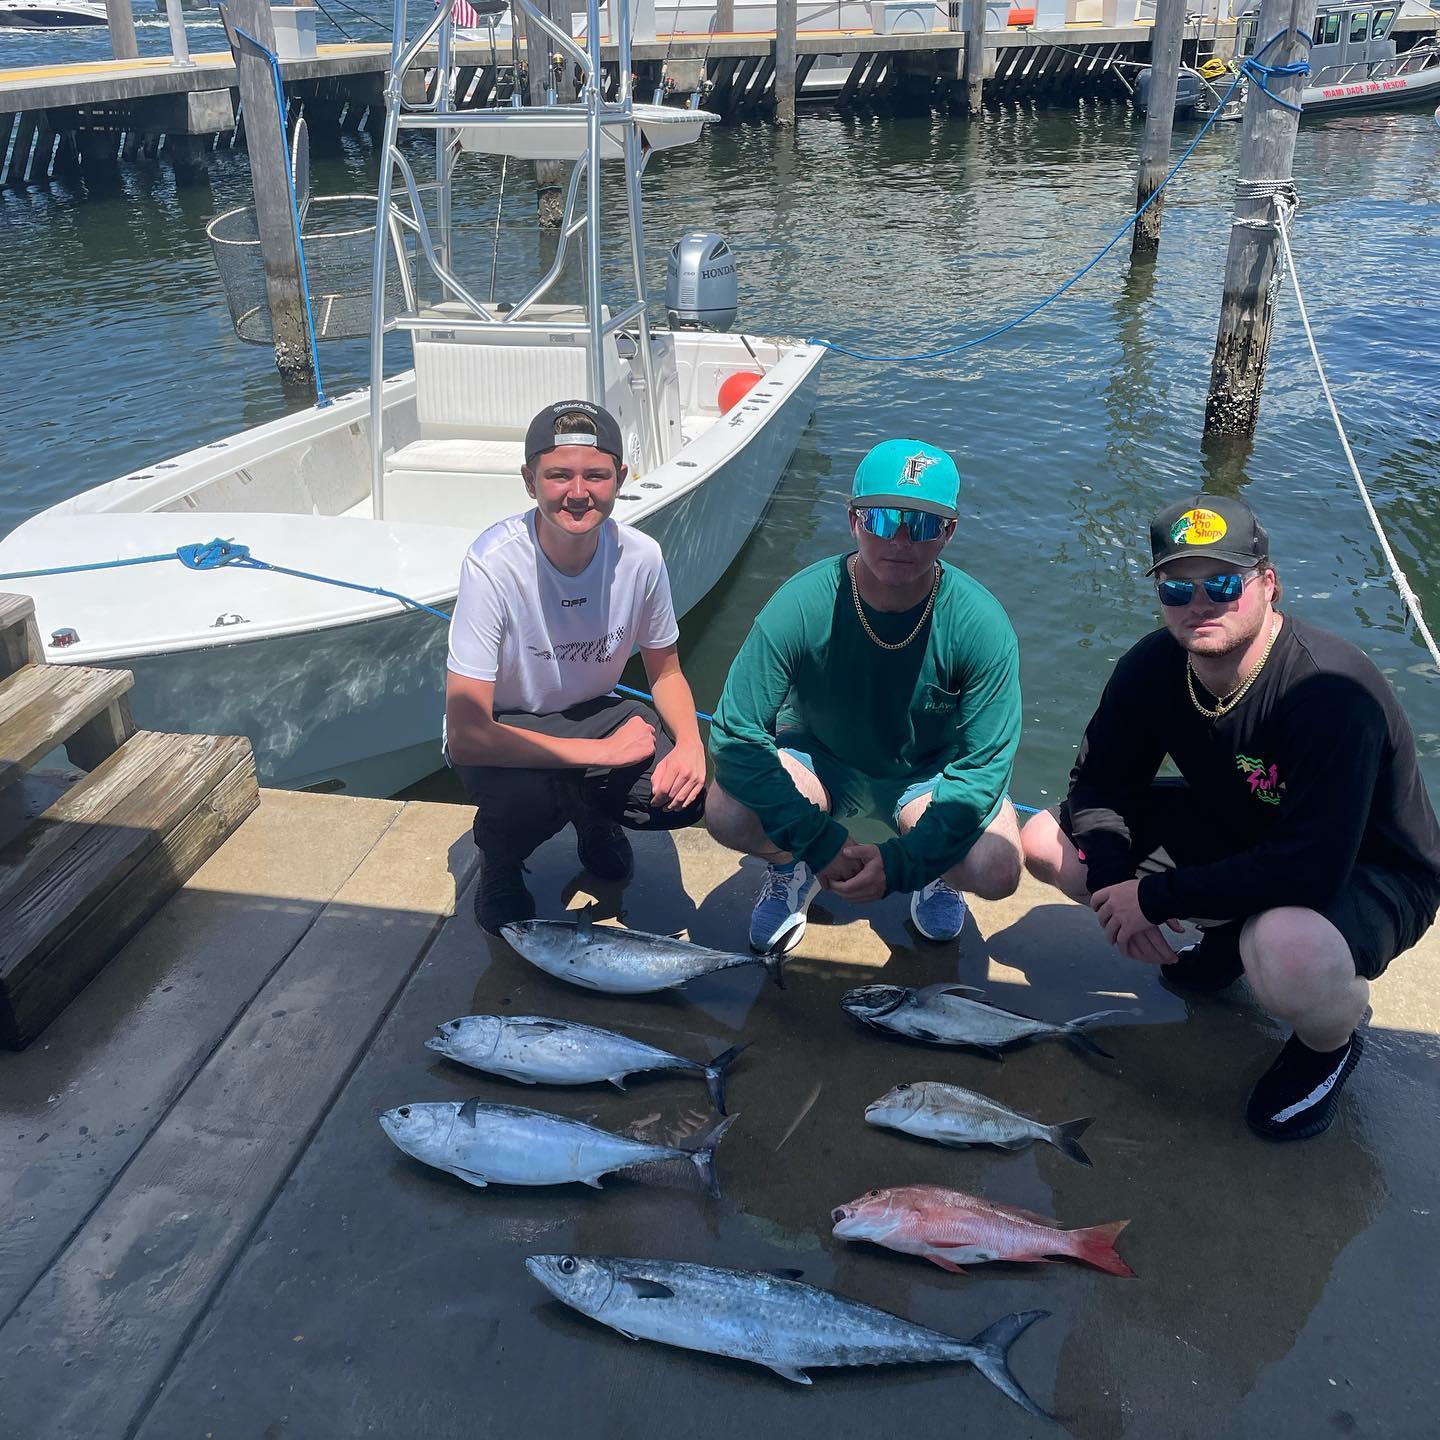 Nice morning trip today for these boys from our nation’s Capitol. #GOHARDFISHING #MIAMI #charterfishing @starbrite_com @captharrysfishingsupply @pennfishing